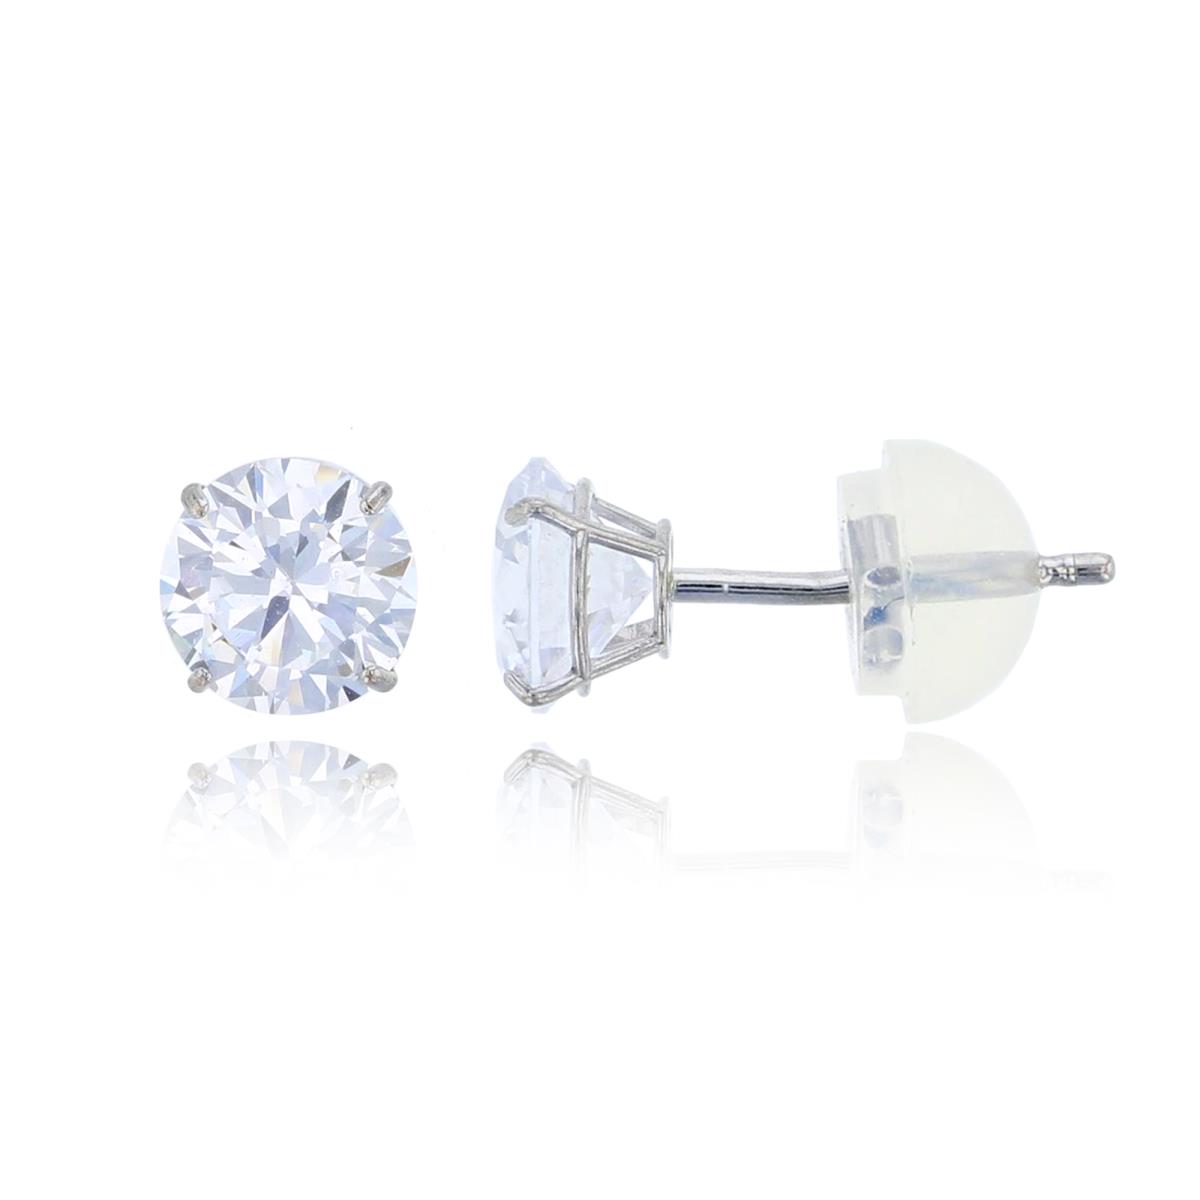 14K White Gold 4mm Round Cut Solitaire Stud Earring